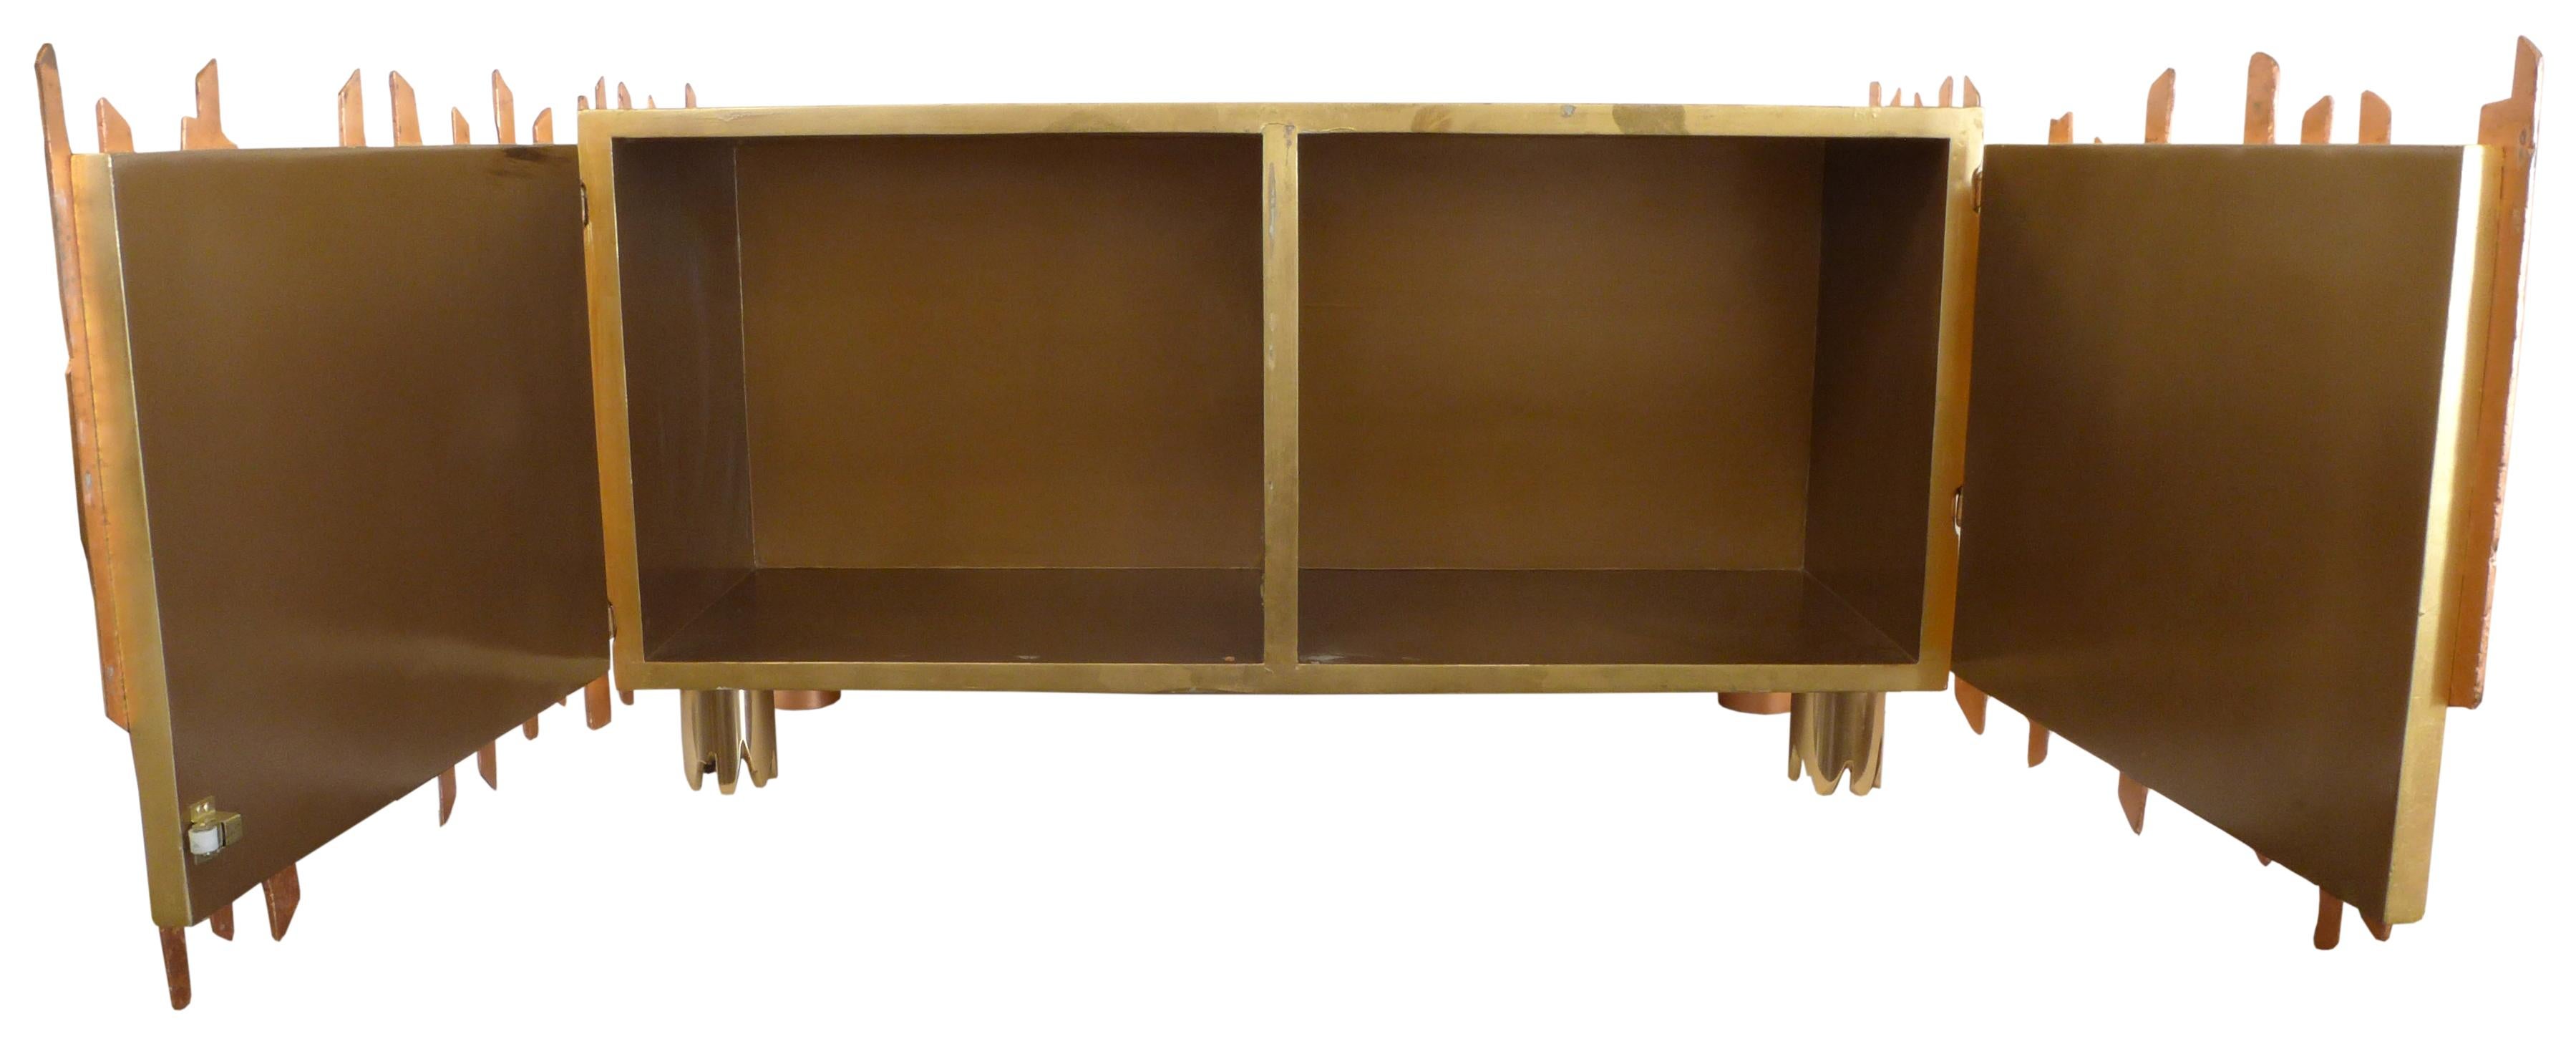 Late 20th Century Gold-Leaf Credenza by Pedro Baez, Mexico City For Sale